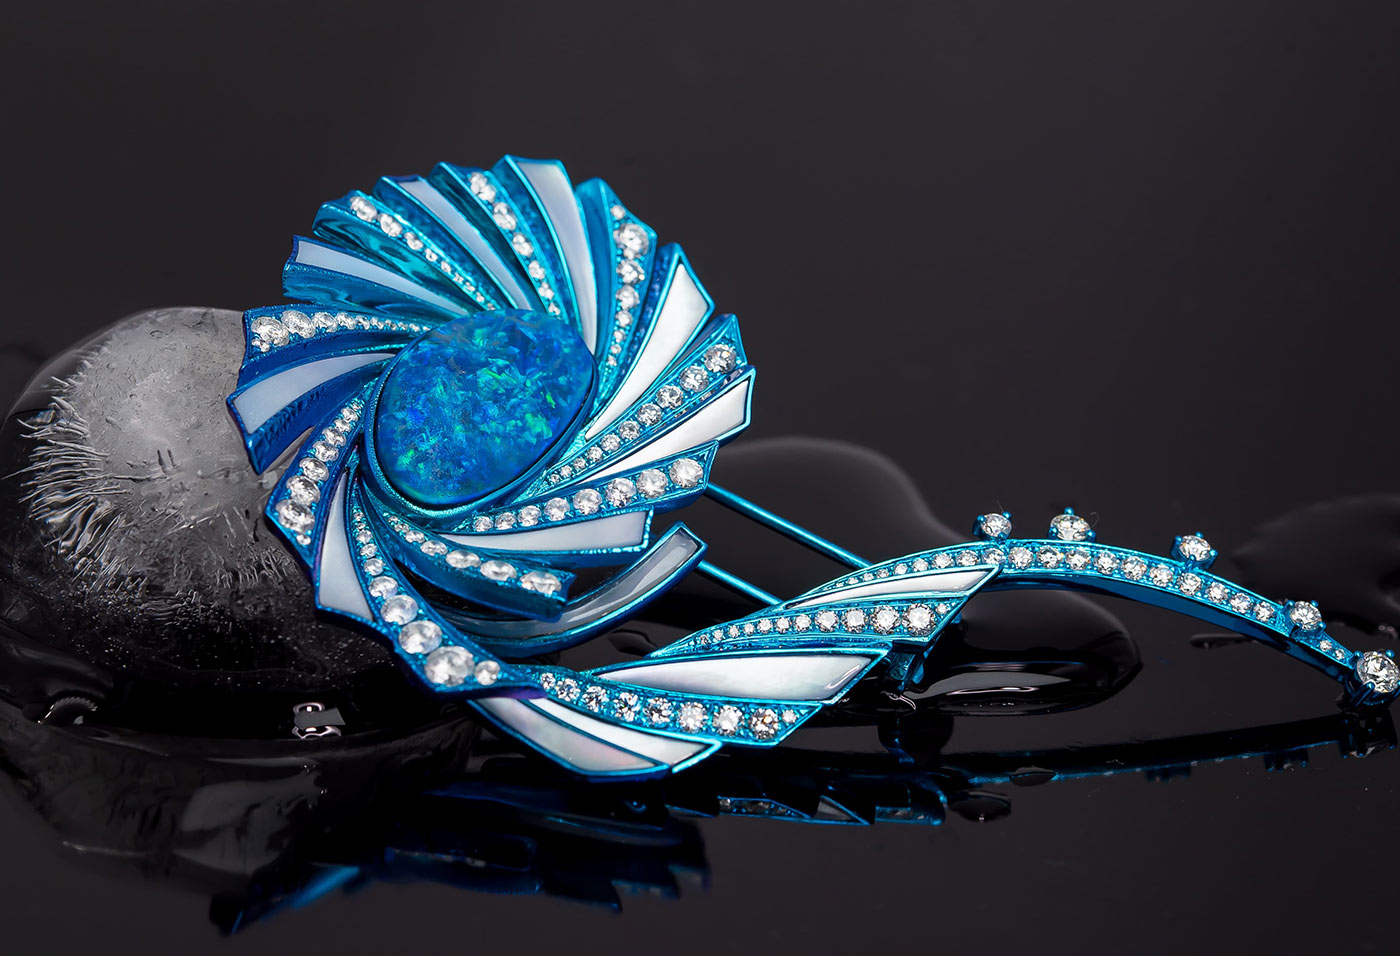 Cindy Xu Stingray Swirl brooch crafted in blue titanium with black opal, mother of pearl and diamonds